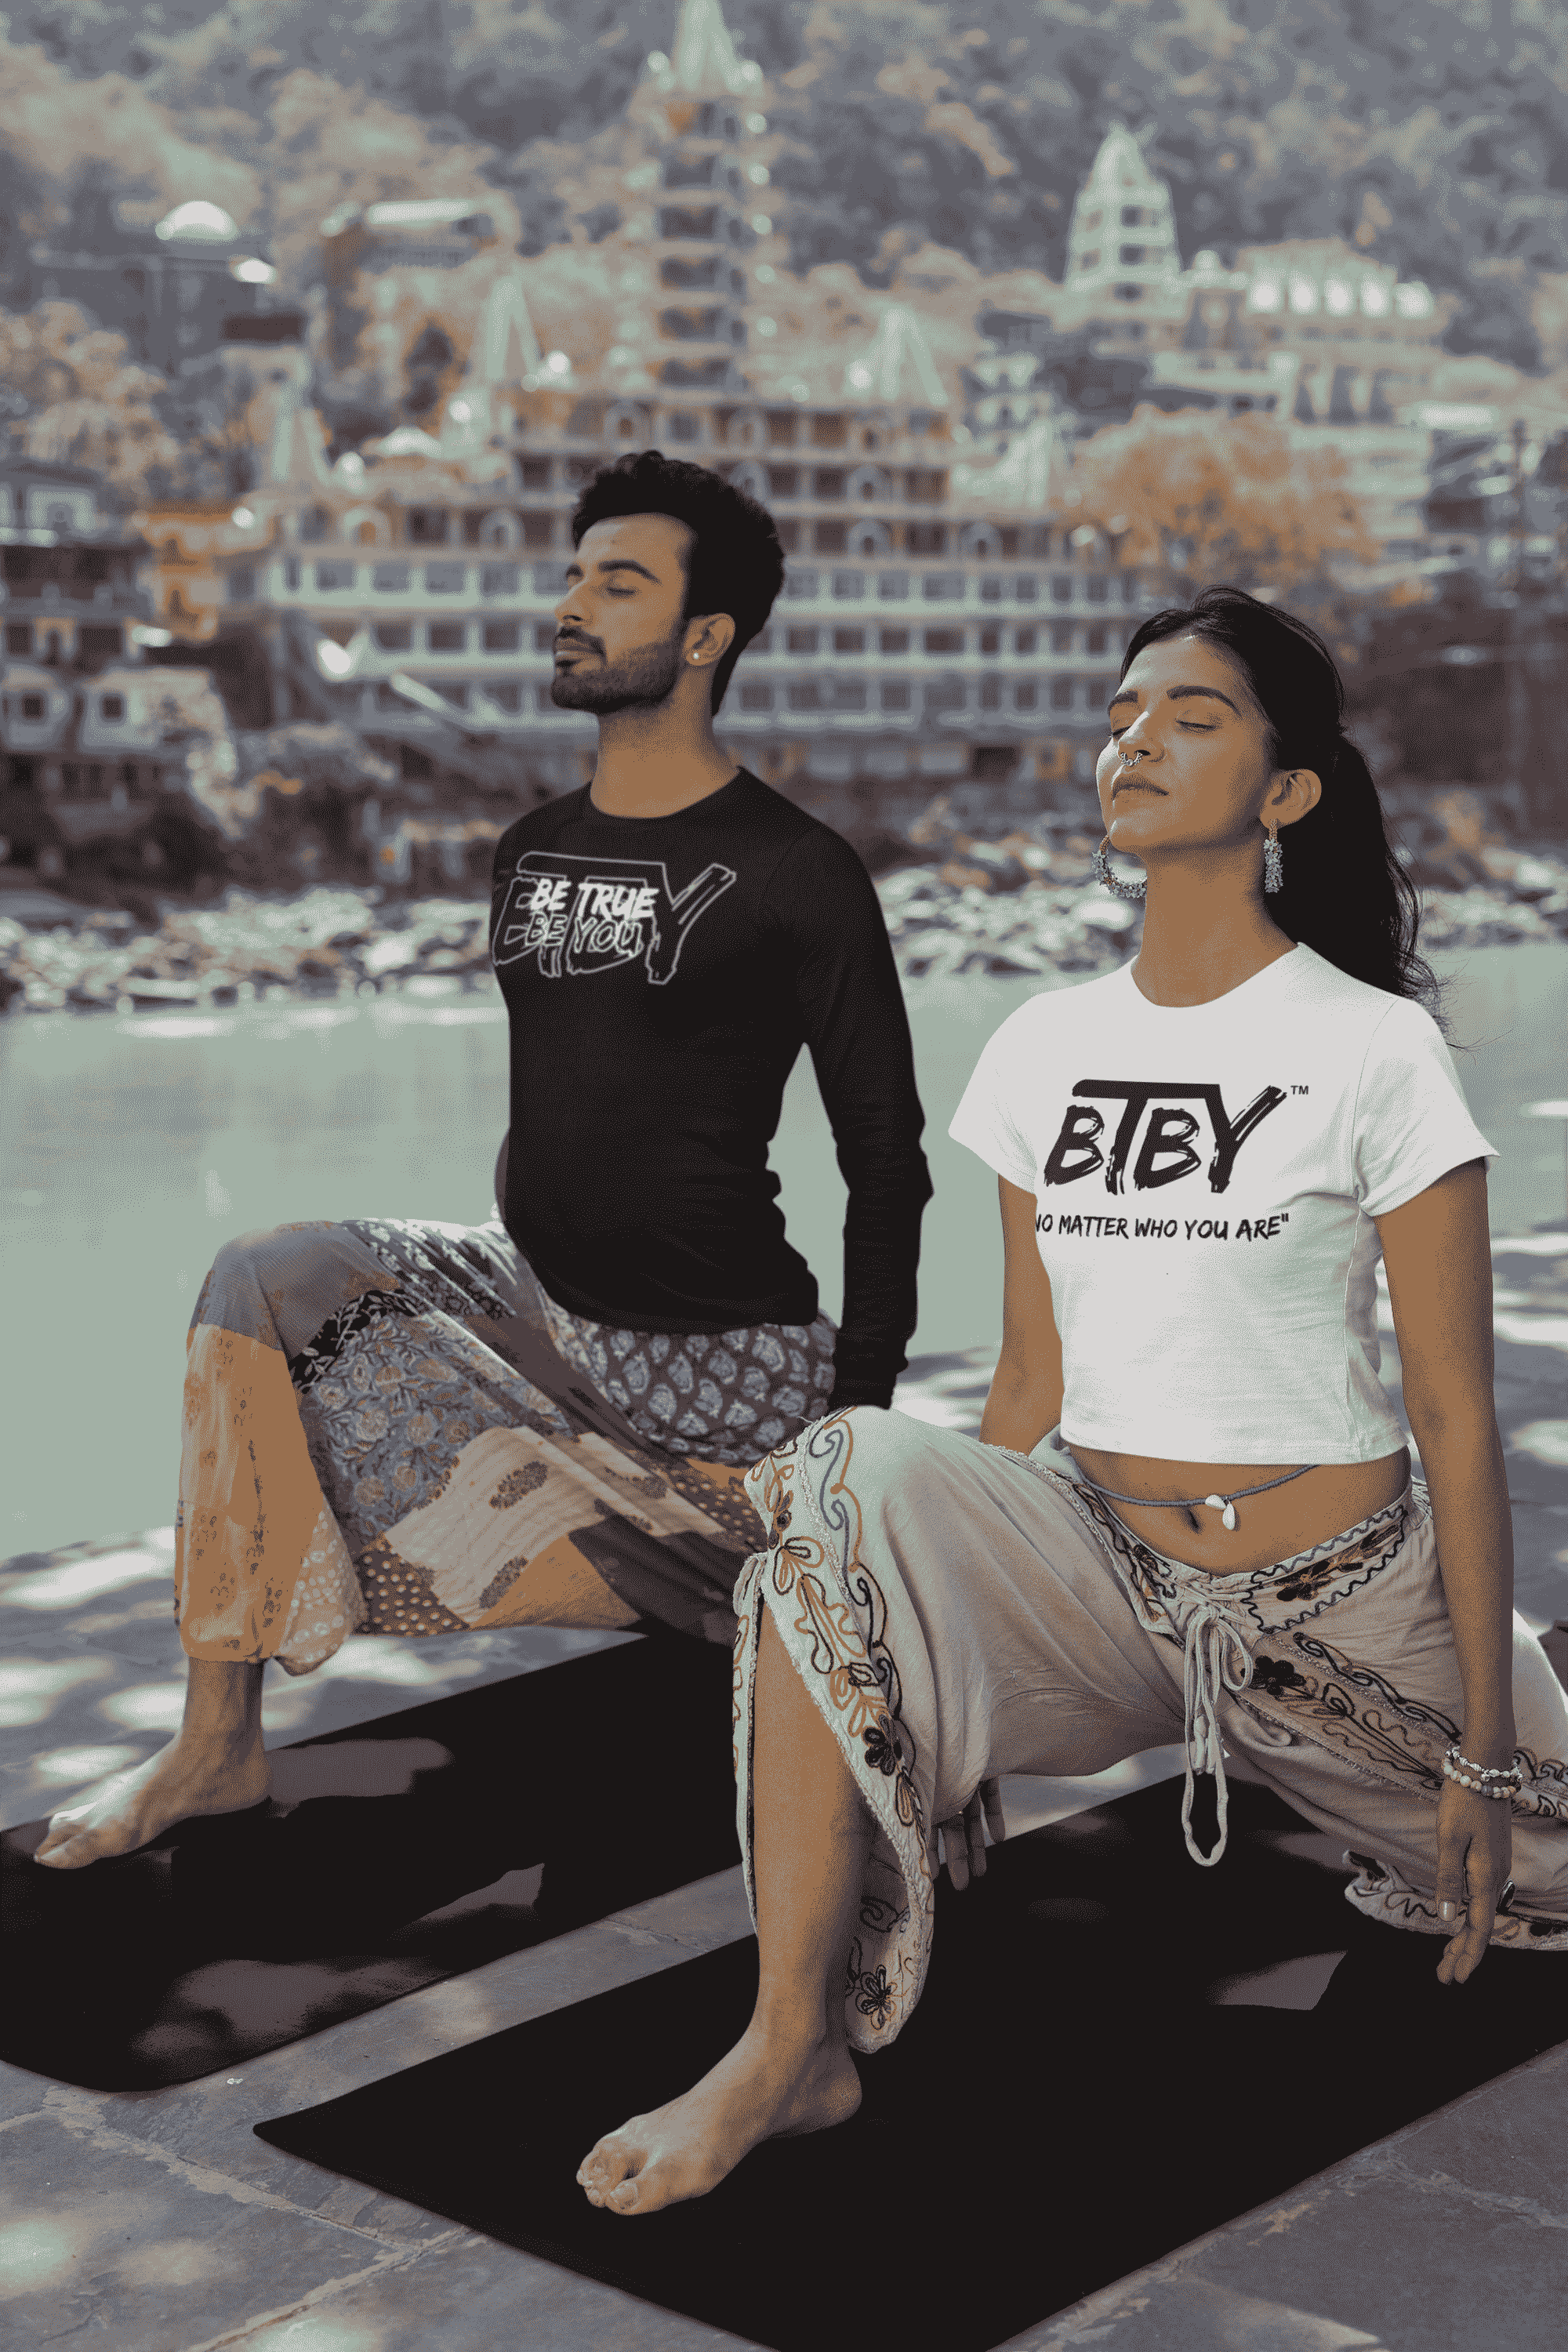 bella-canvas-long-sleeve-tee-and-crop-top-mockup-of-a-couple-practicing-yoga-m33673-min